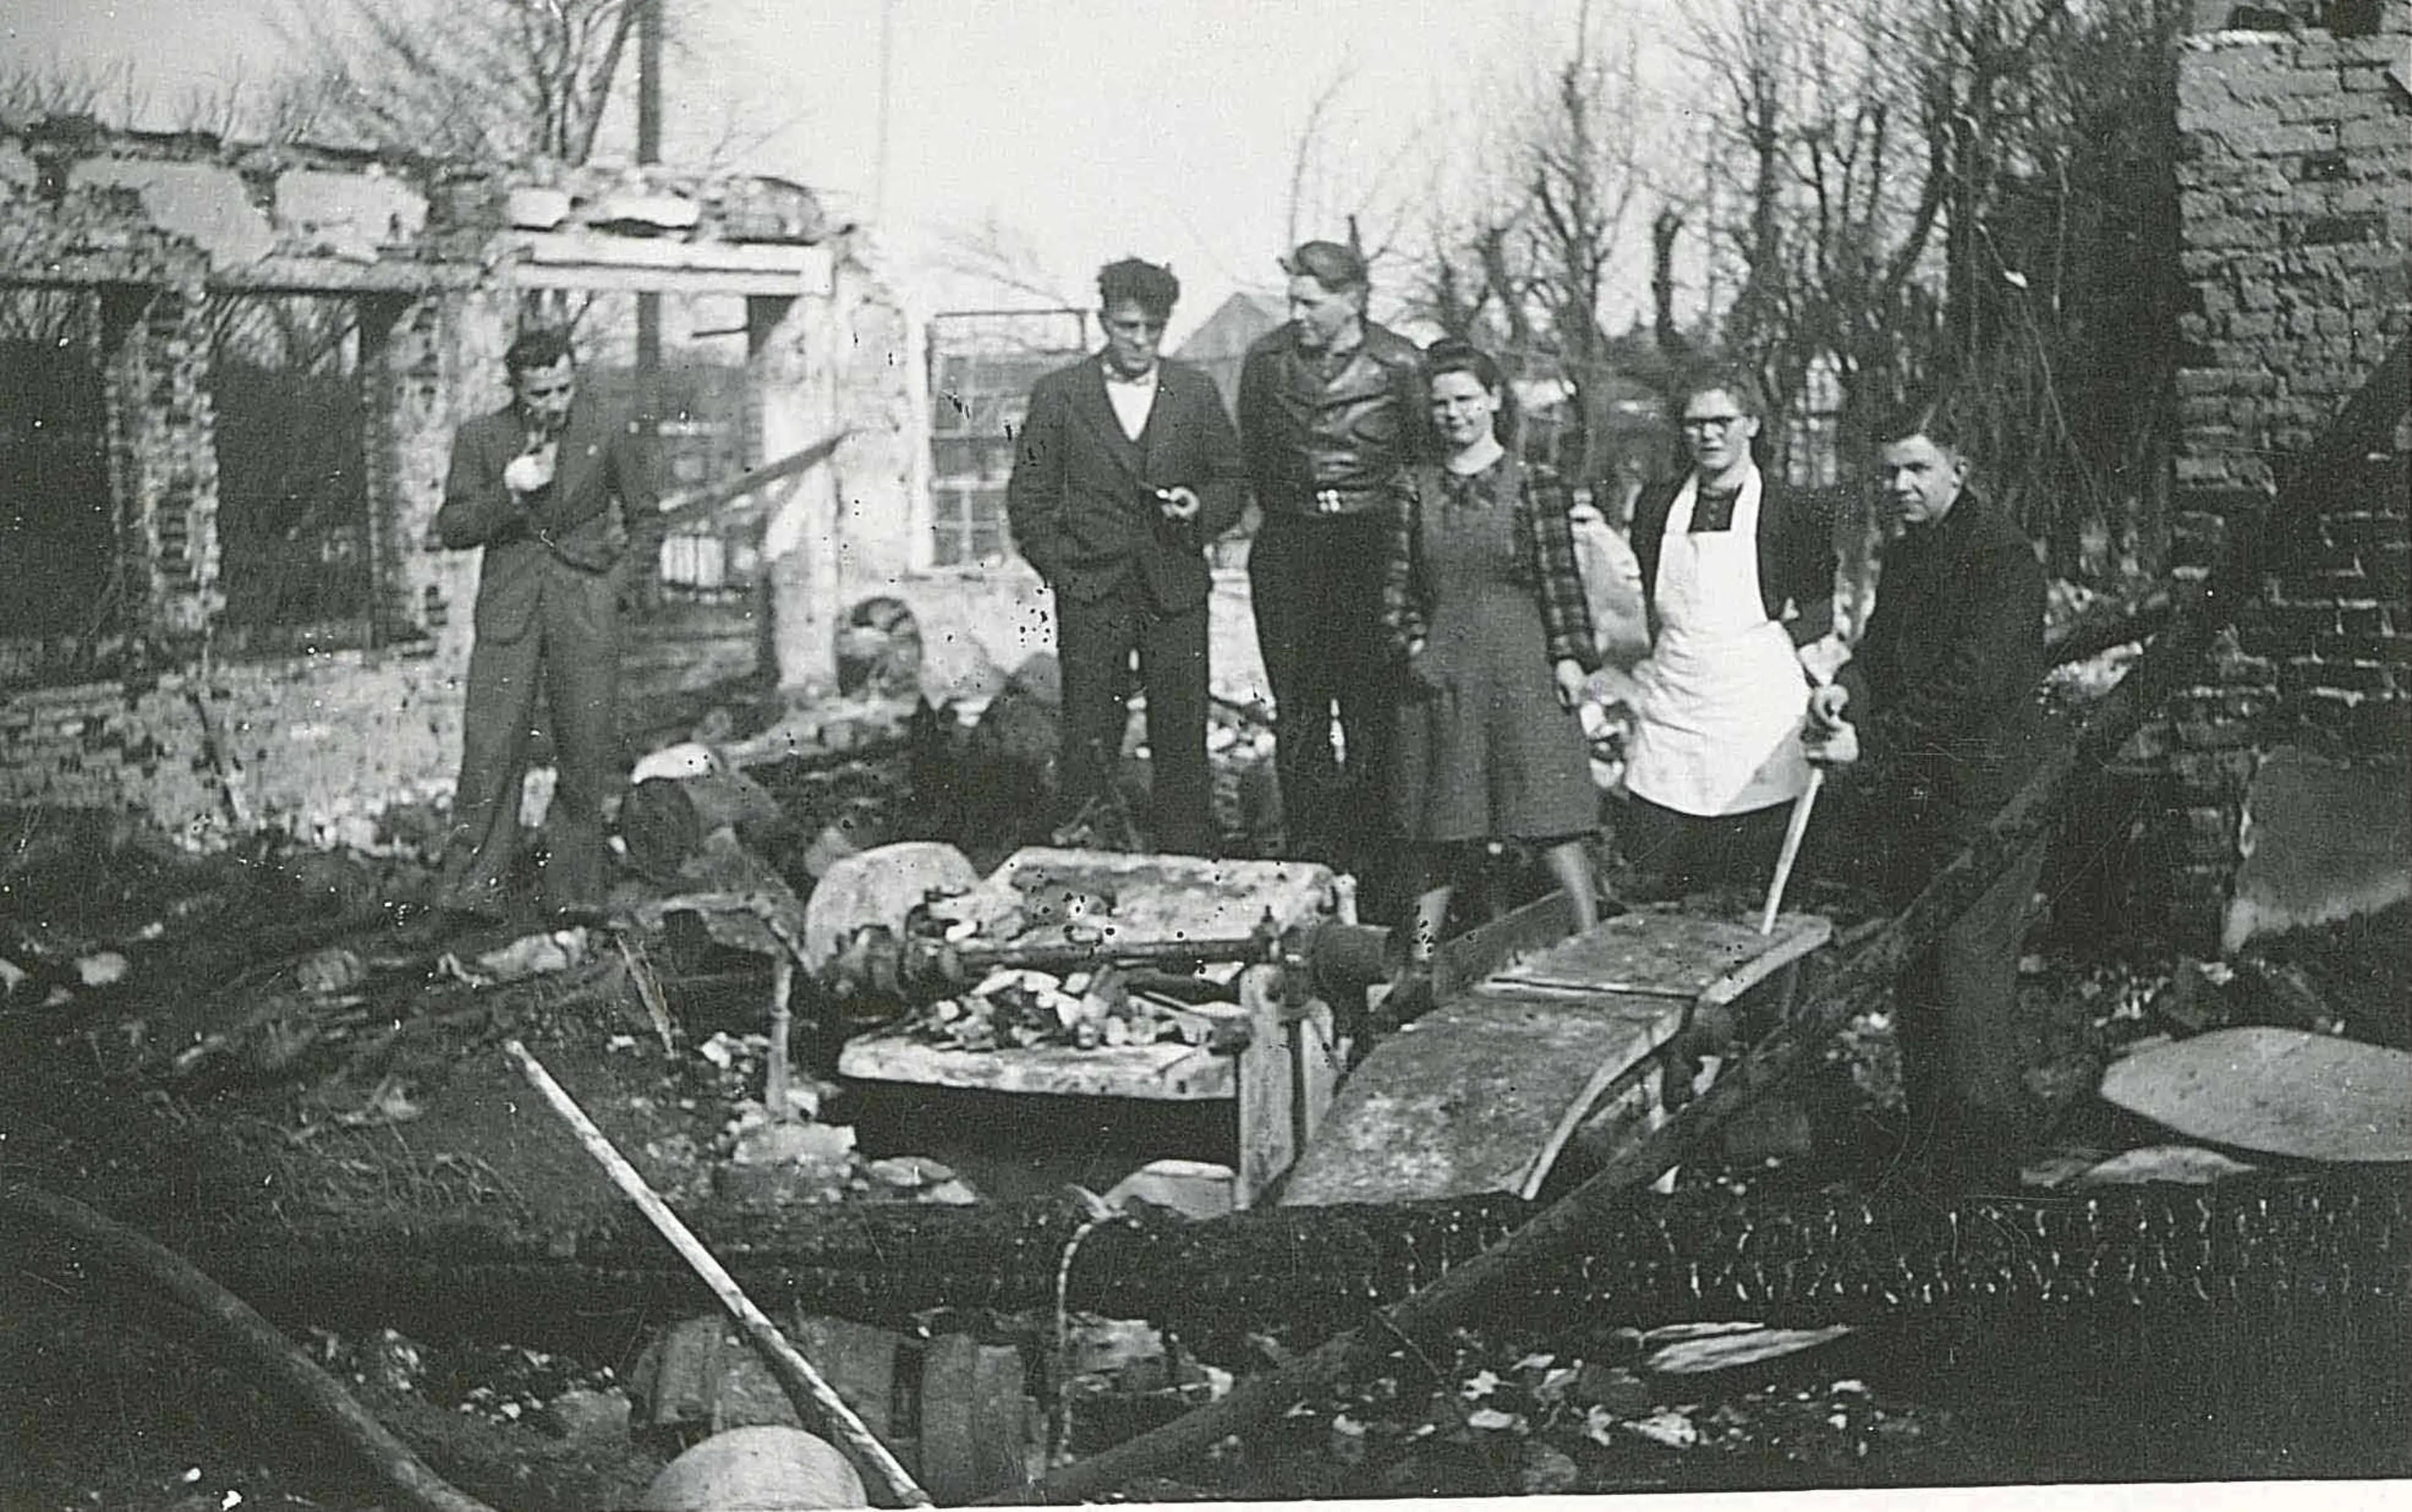 LEGO® employees in the rubbles of the old woodworking factory after the fire in 1942